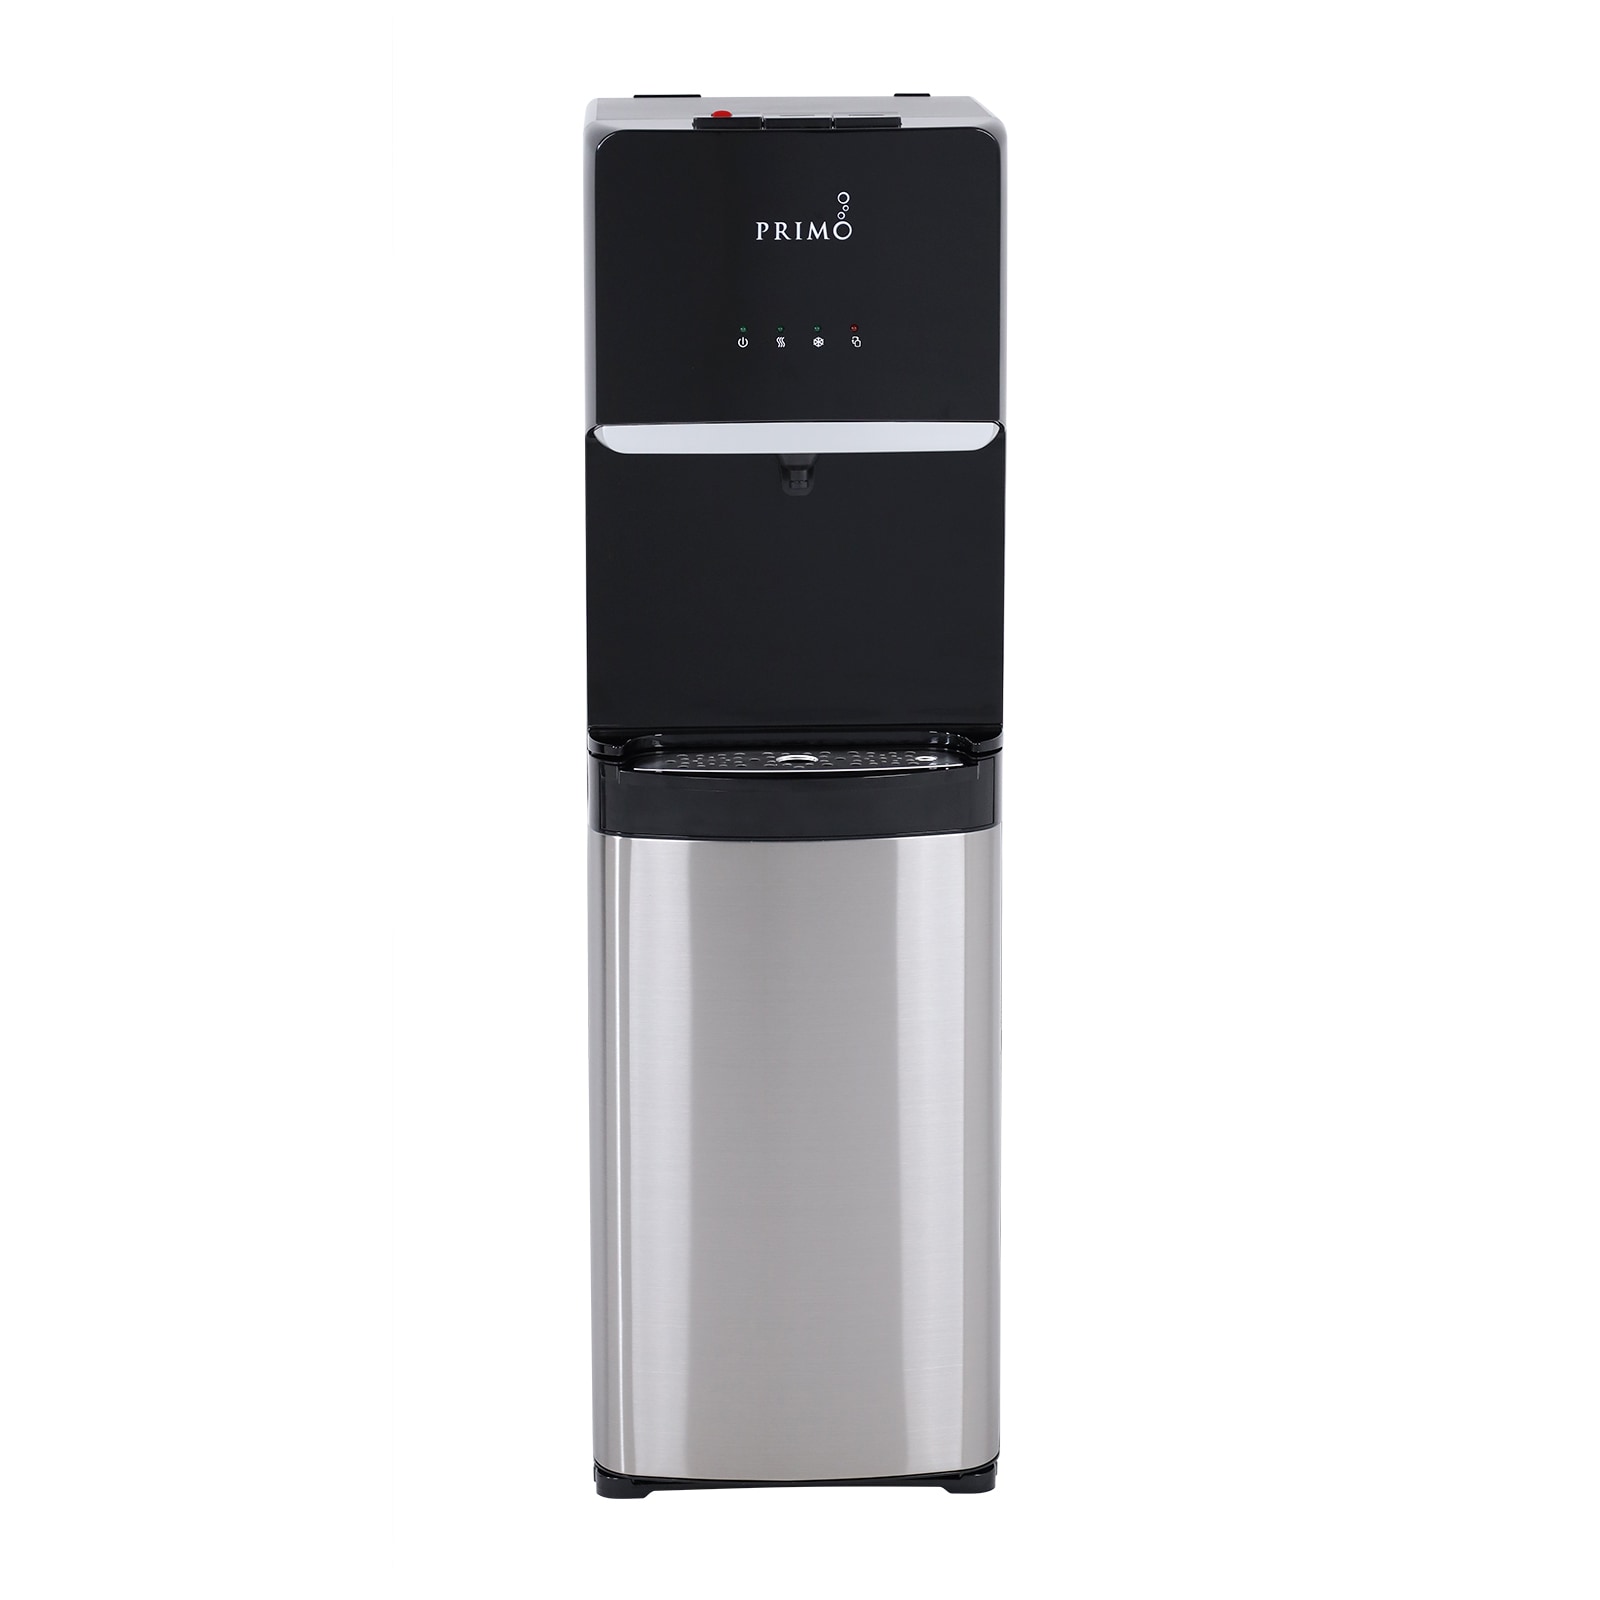 Westinghouse Premium Bottom-Loading Tri-Temp Water Dispenser, 3 temperature  settings, easy-to-use push buttons 